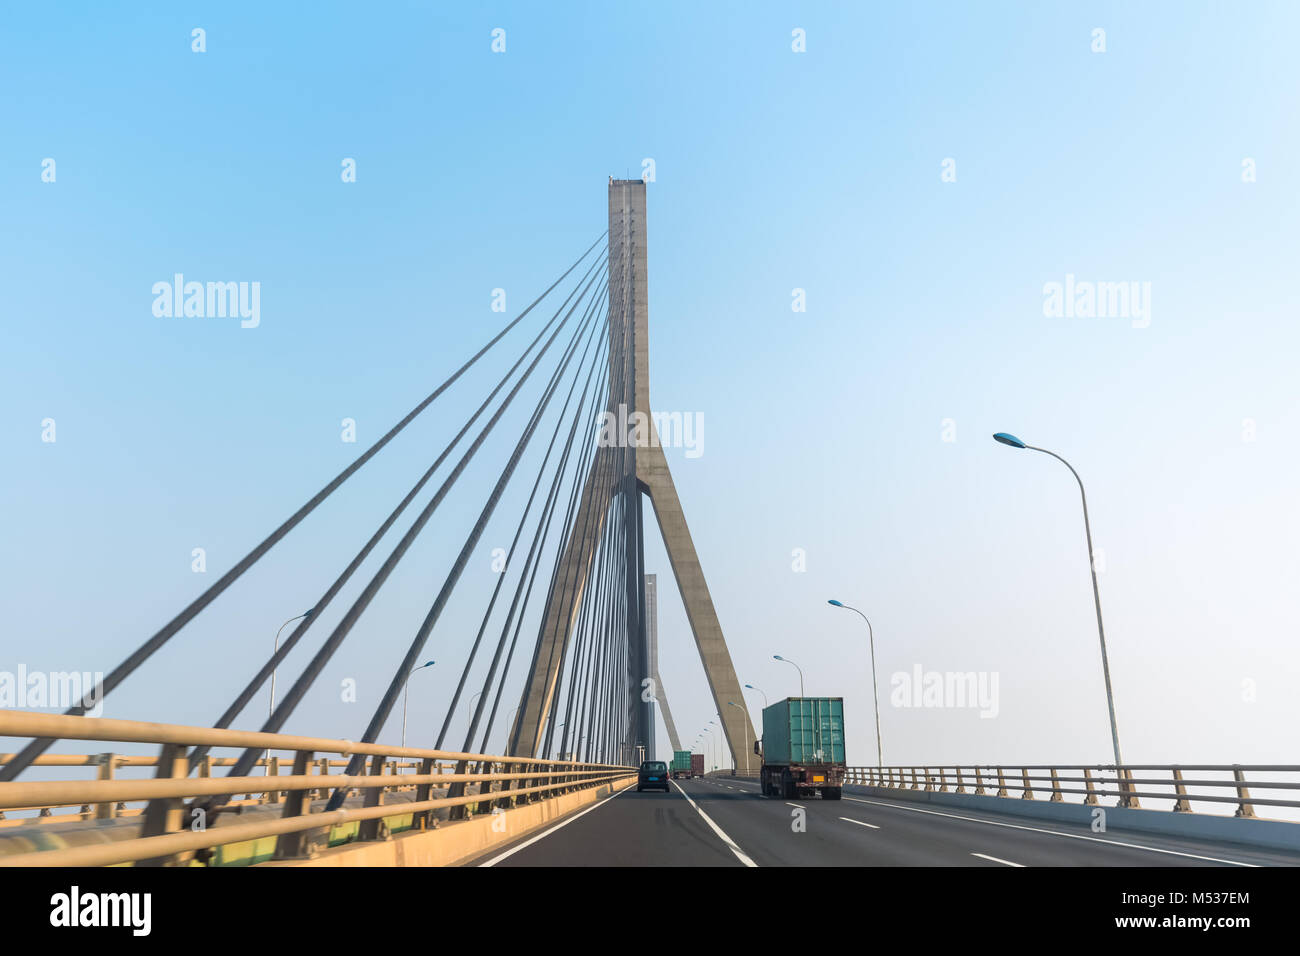 cable-stayed bridge with container truck Stock Photo